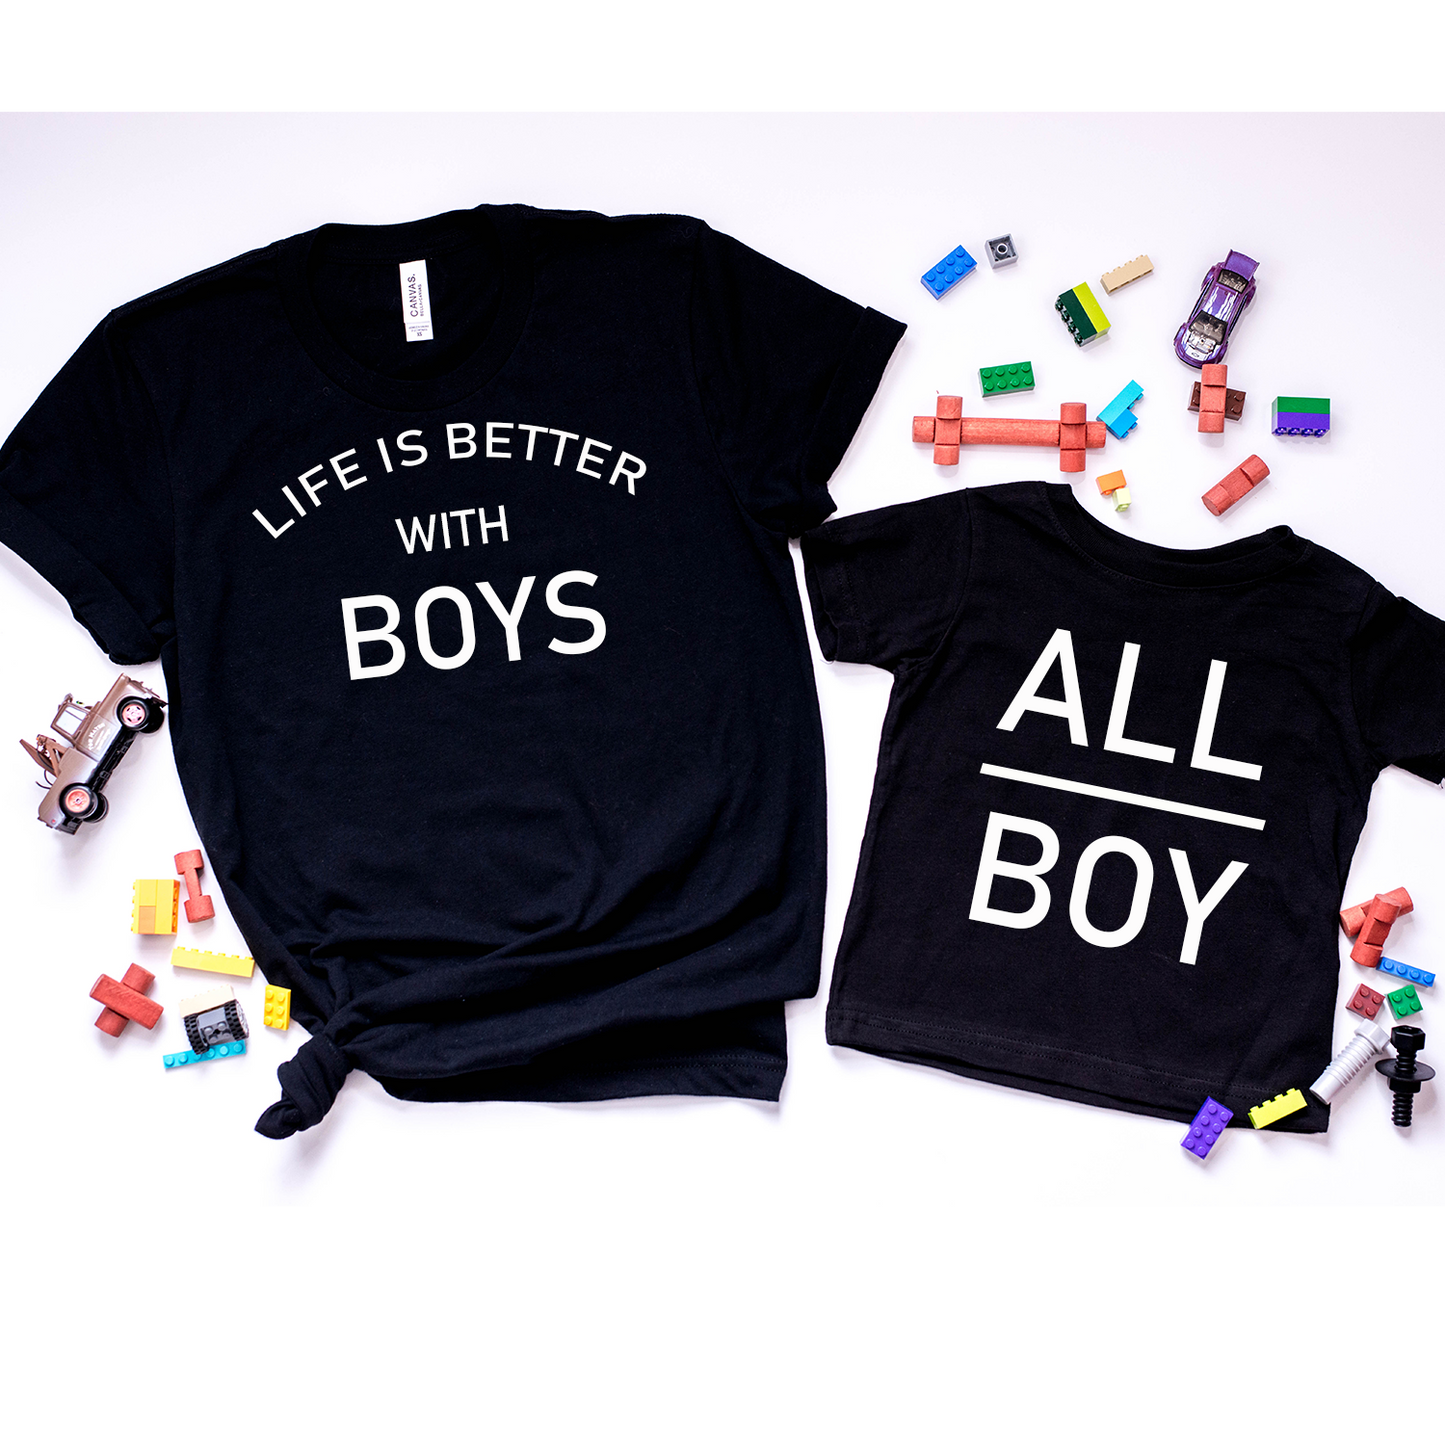 Life is better with boys - adult black t-shirt